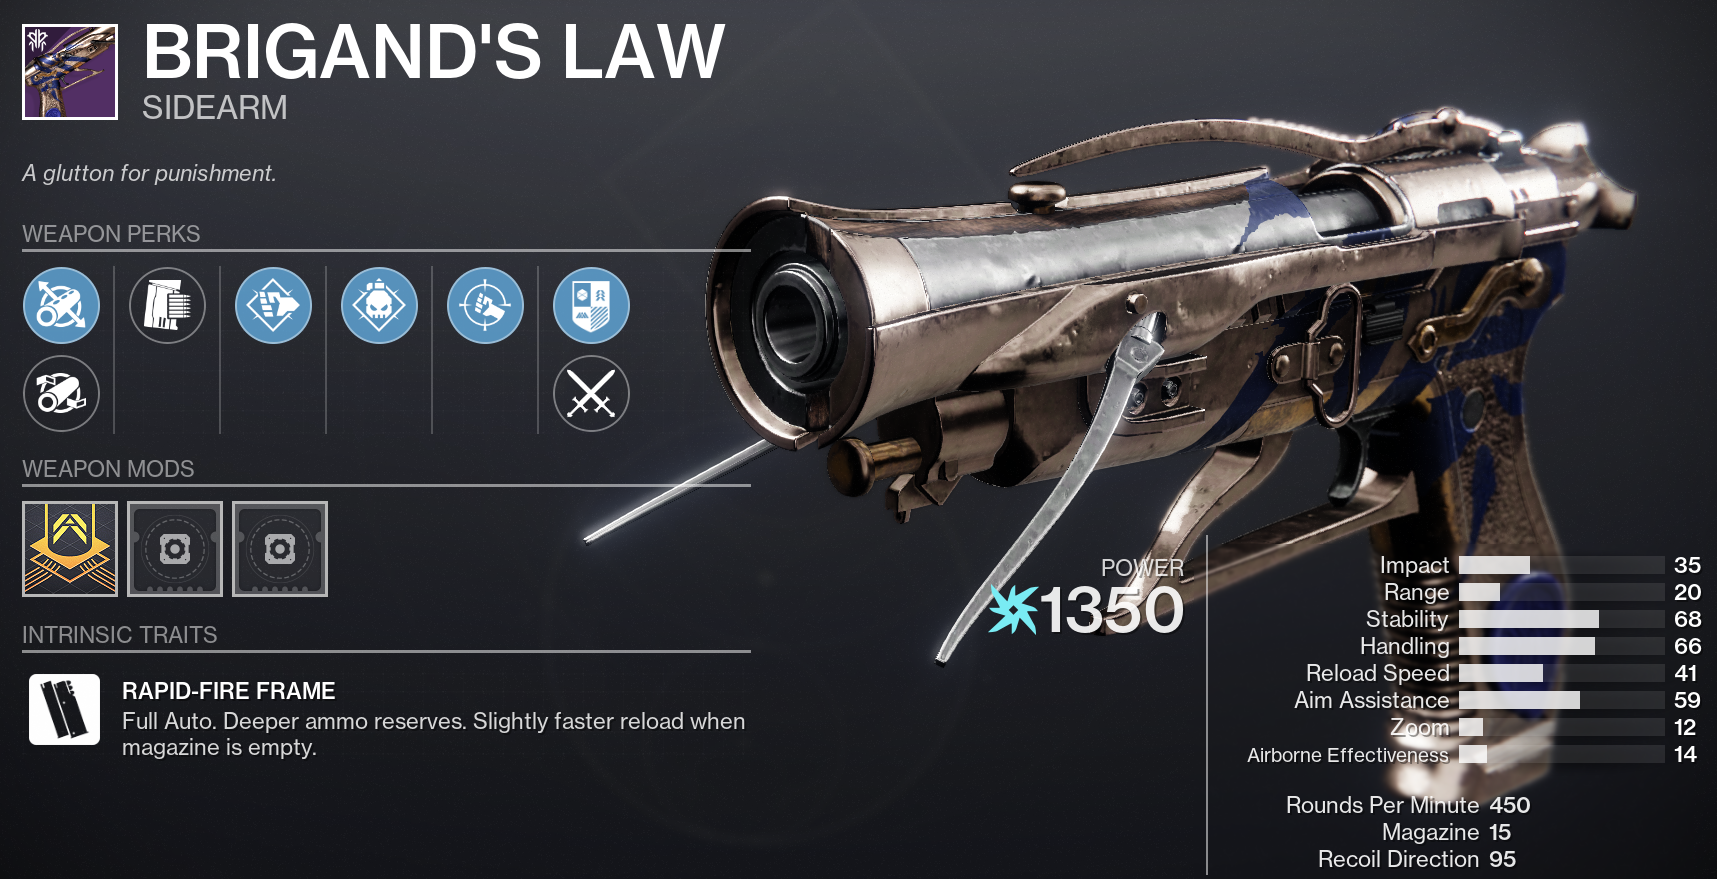 How to get Brigandâ€™s Law in Destiny 2 - Brigandâ€™s Law God Rolls for PvE and...